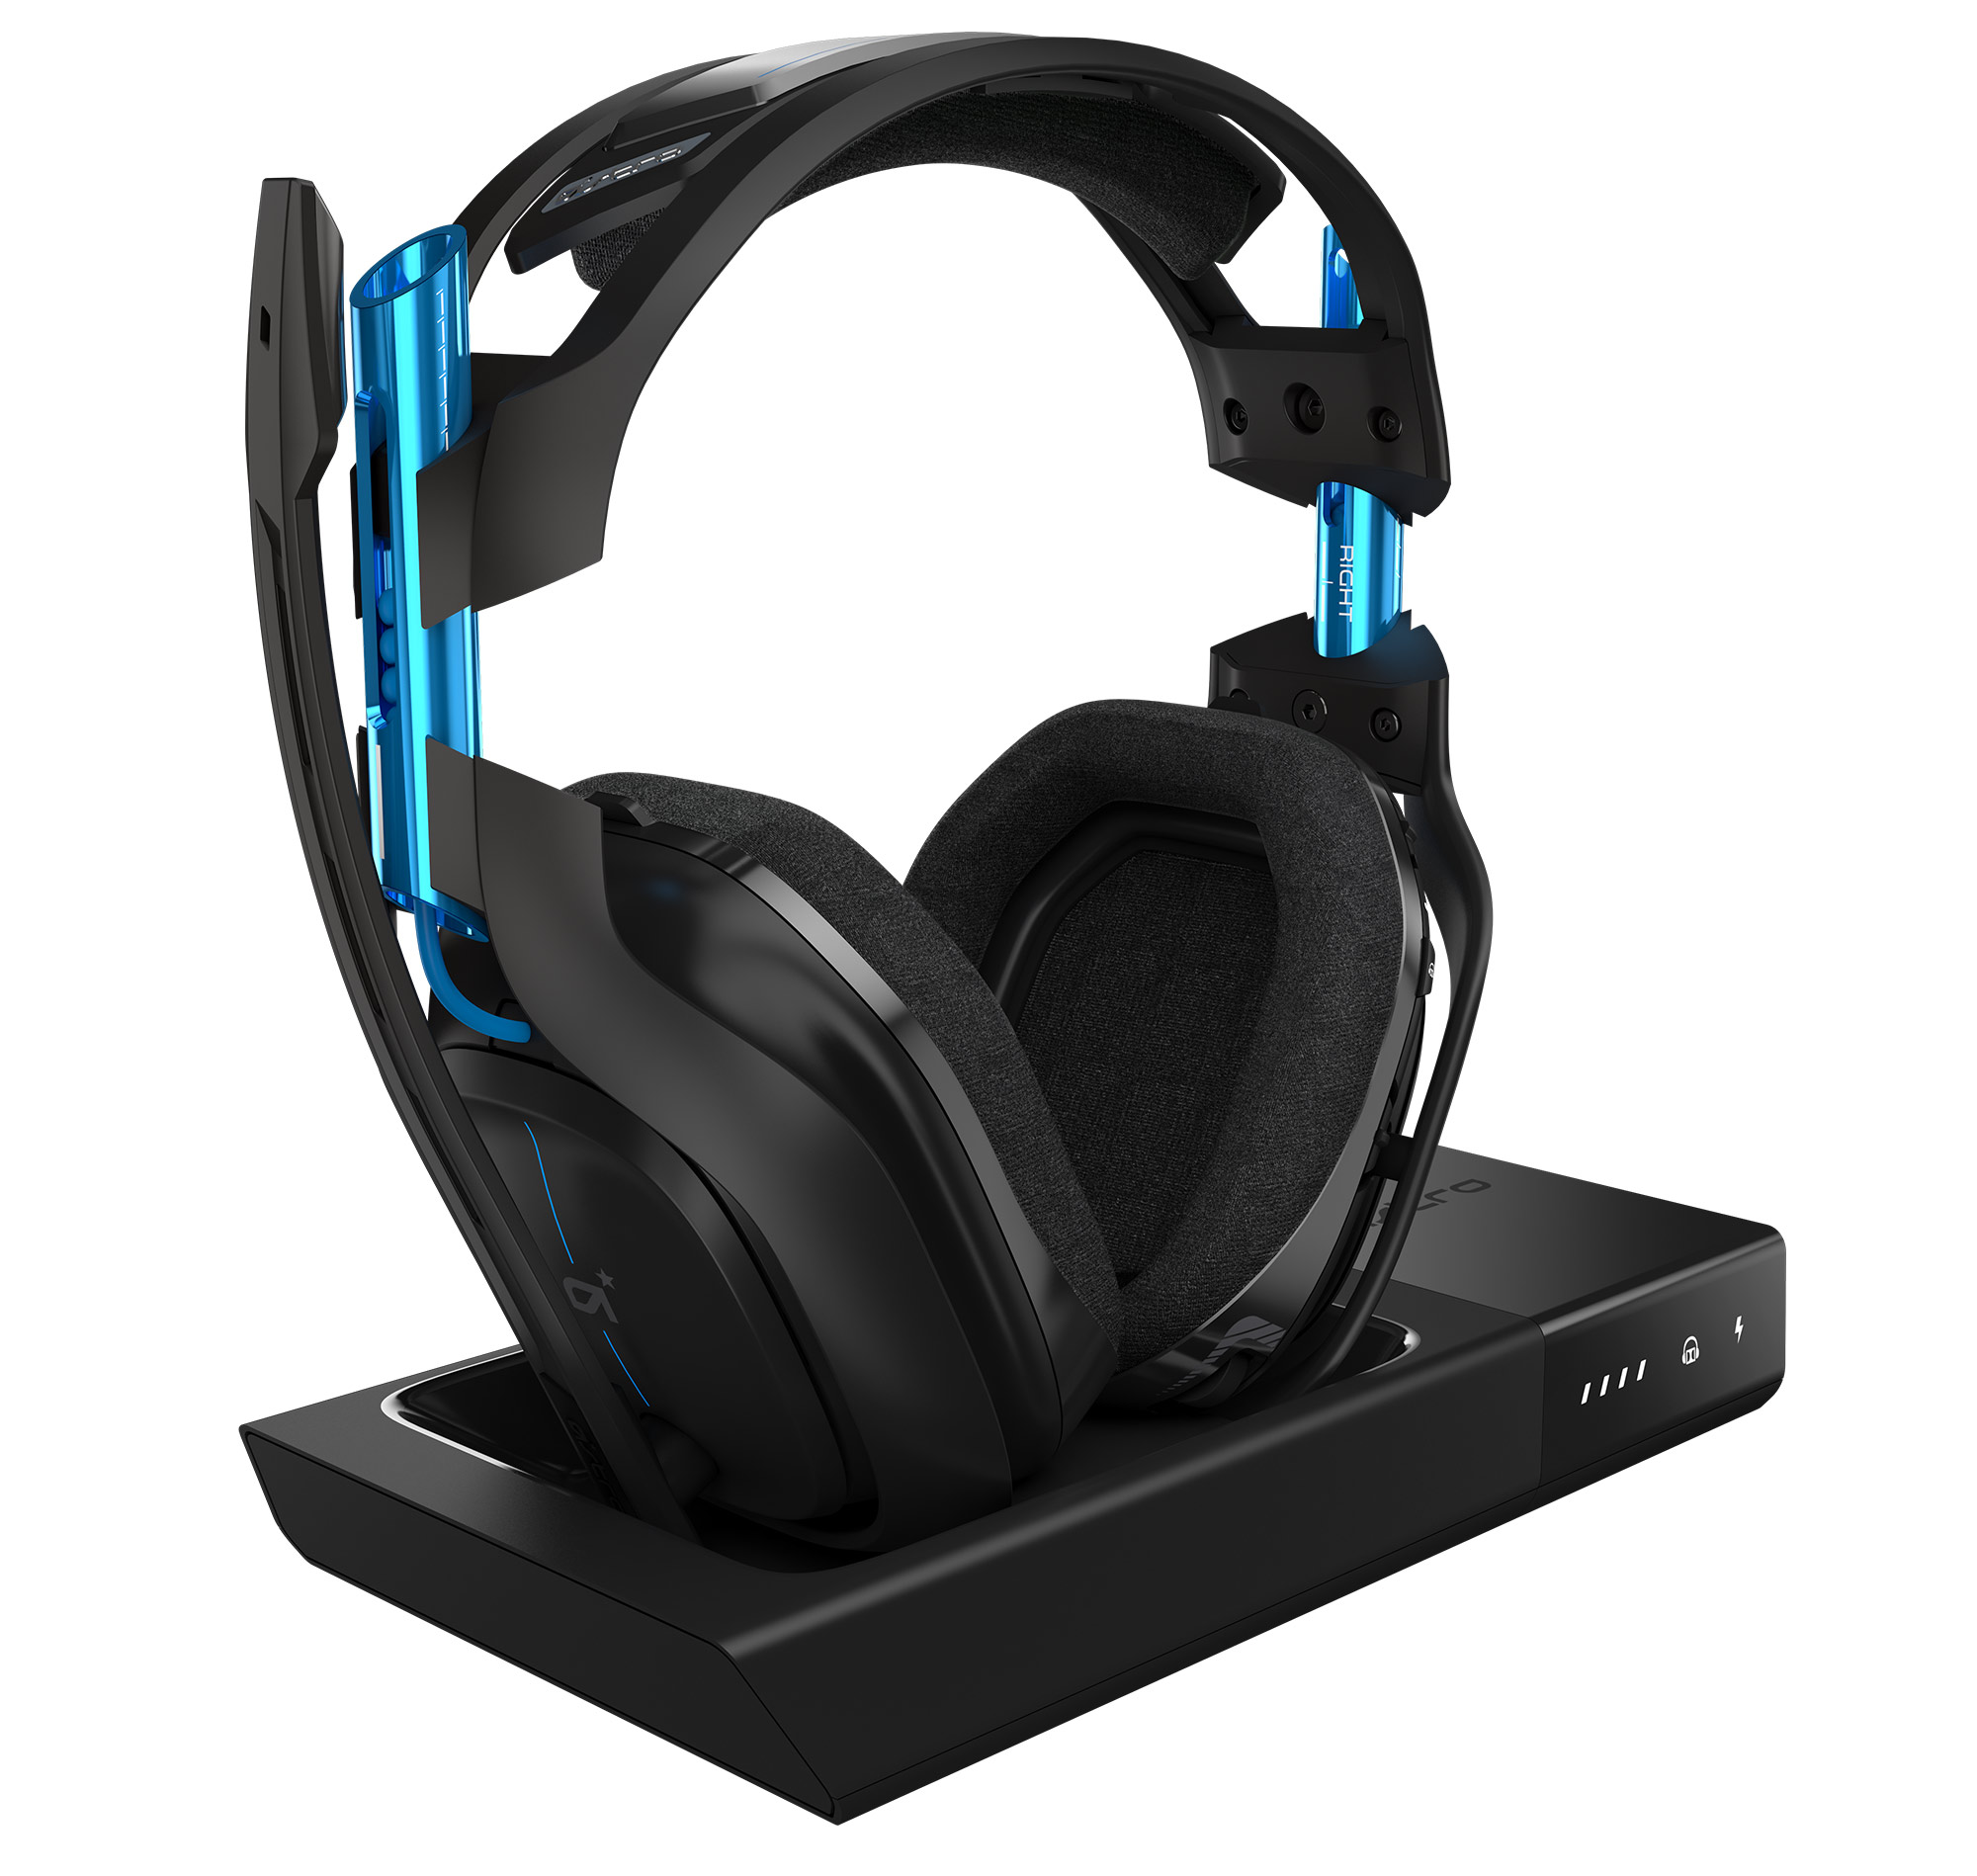 Kan worden berekend Arabische Sarabo muziek The New ASTRO A50 Wireless Headset Features New Base Station, Mod Kit  Support, Fully Wireless on Xbox One, Dolby Headphone 7.1, & More | High-Def  Digest